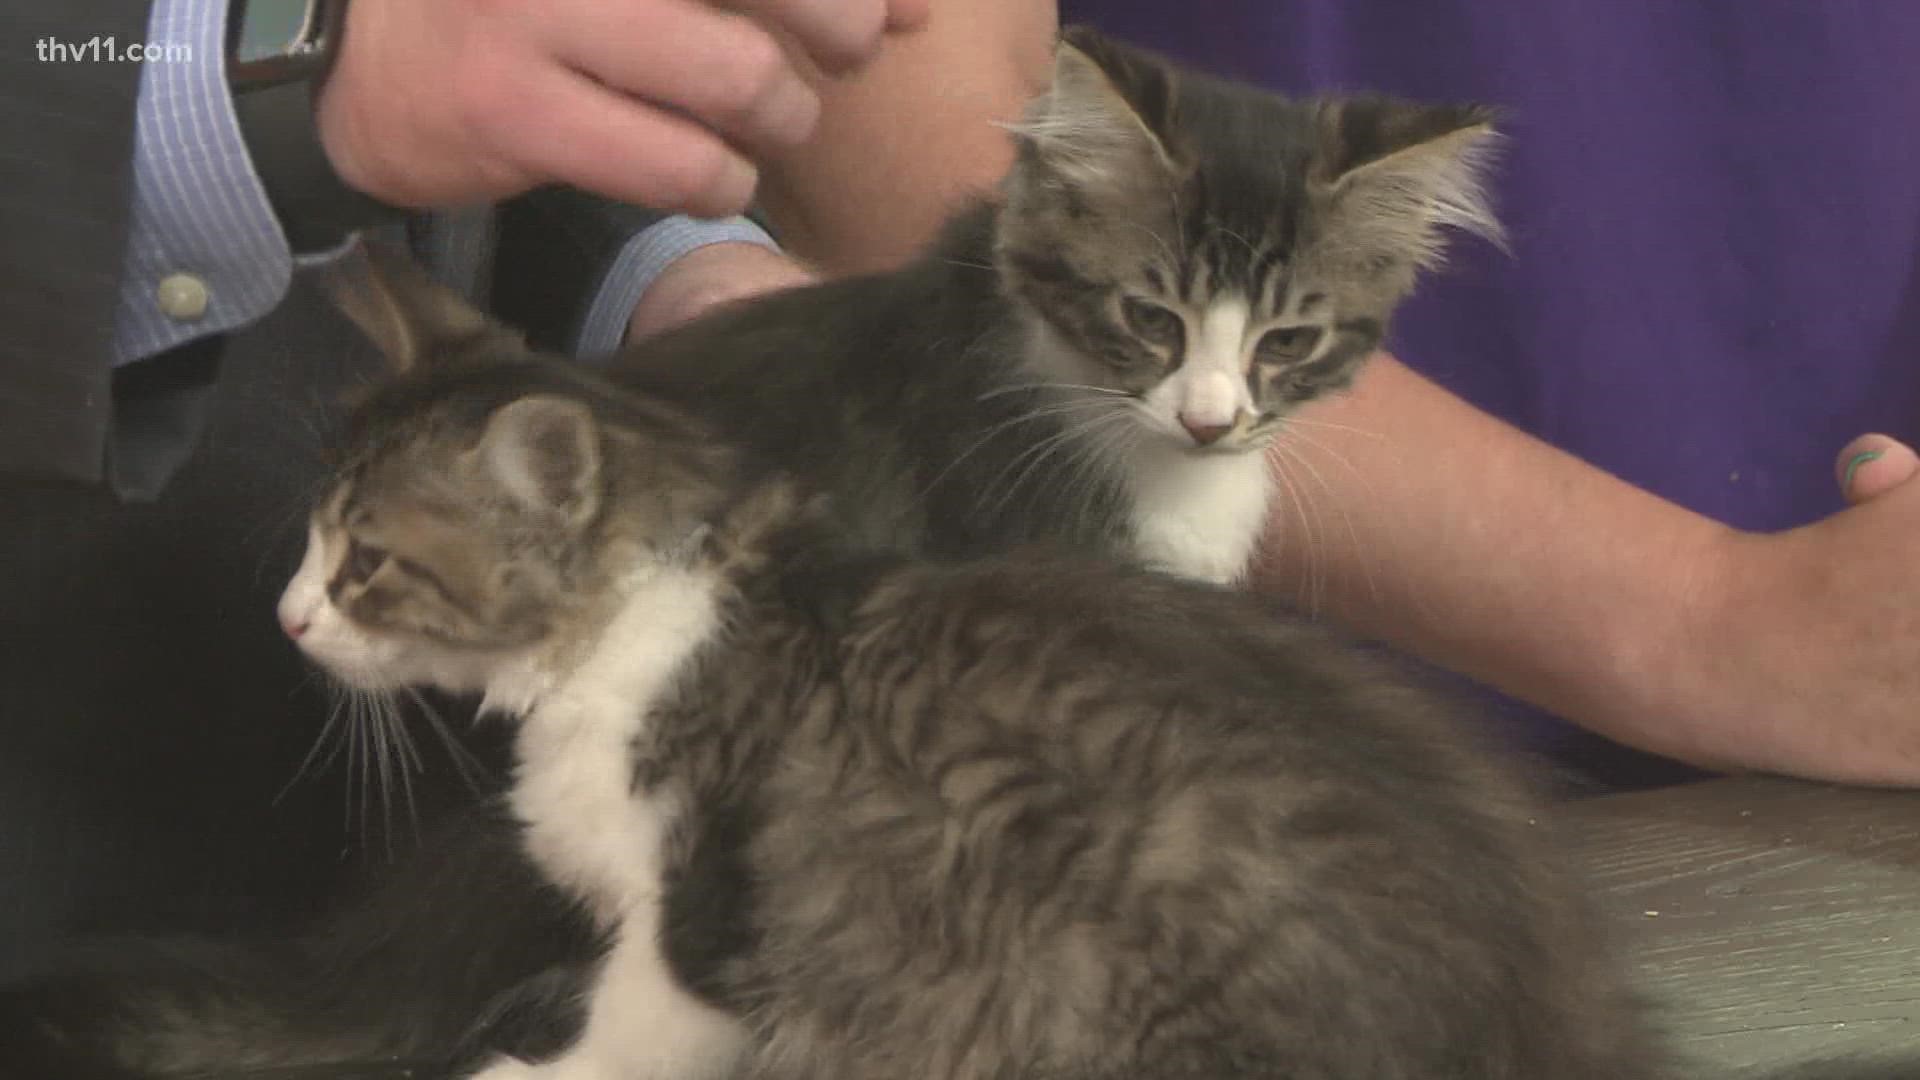 Betsy Robb with Friends of the Animal Village is here with two 8-week-old kittens.